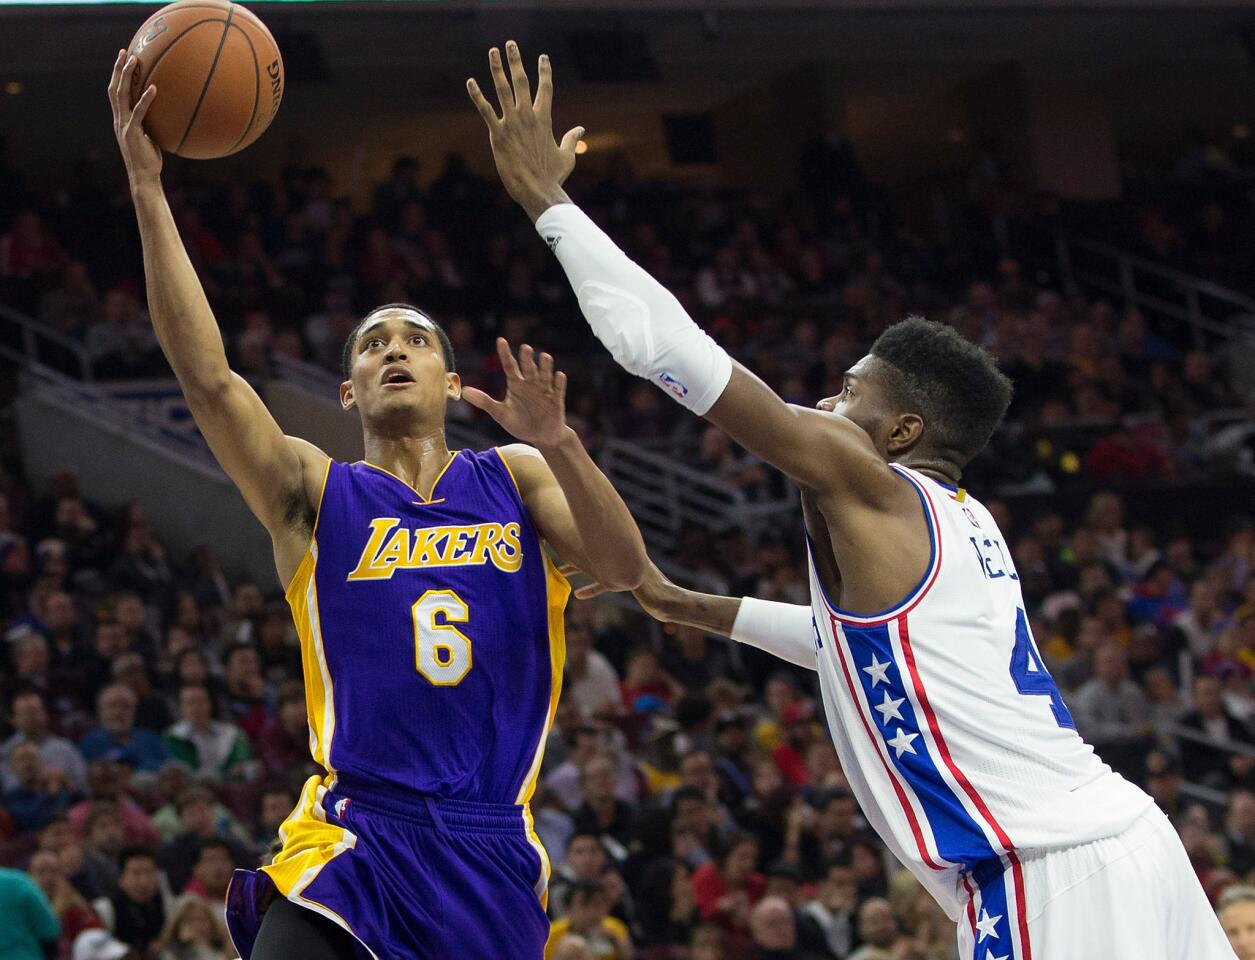 Lakers may benefit by matching a Jordan Clarkson offer sheet this summer